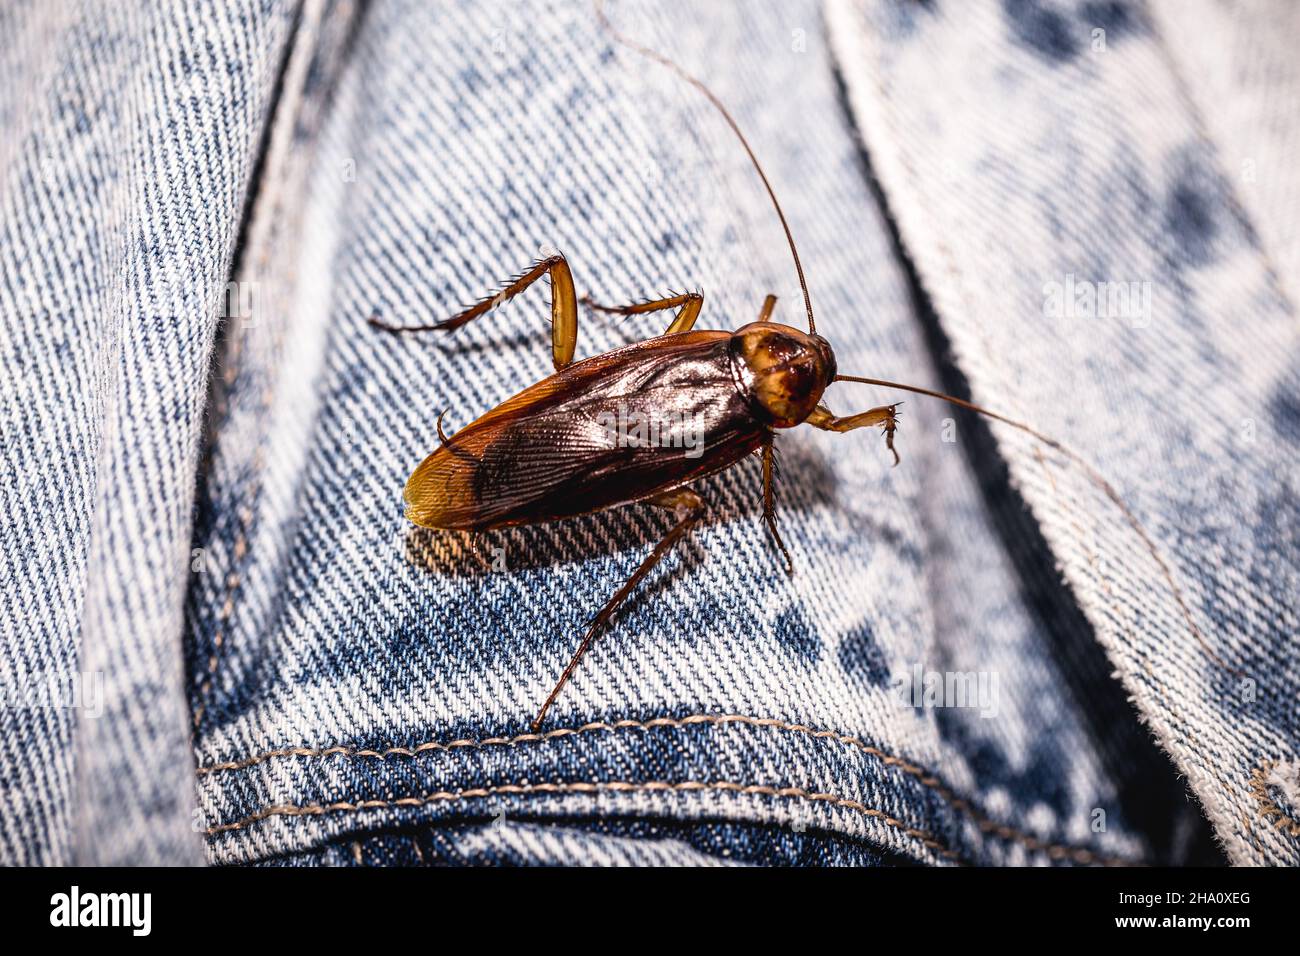 common red cockroach, gnawing denim jacket, indoor insect problem Stock Photo